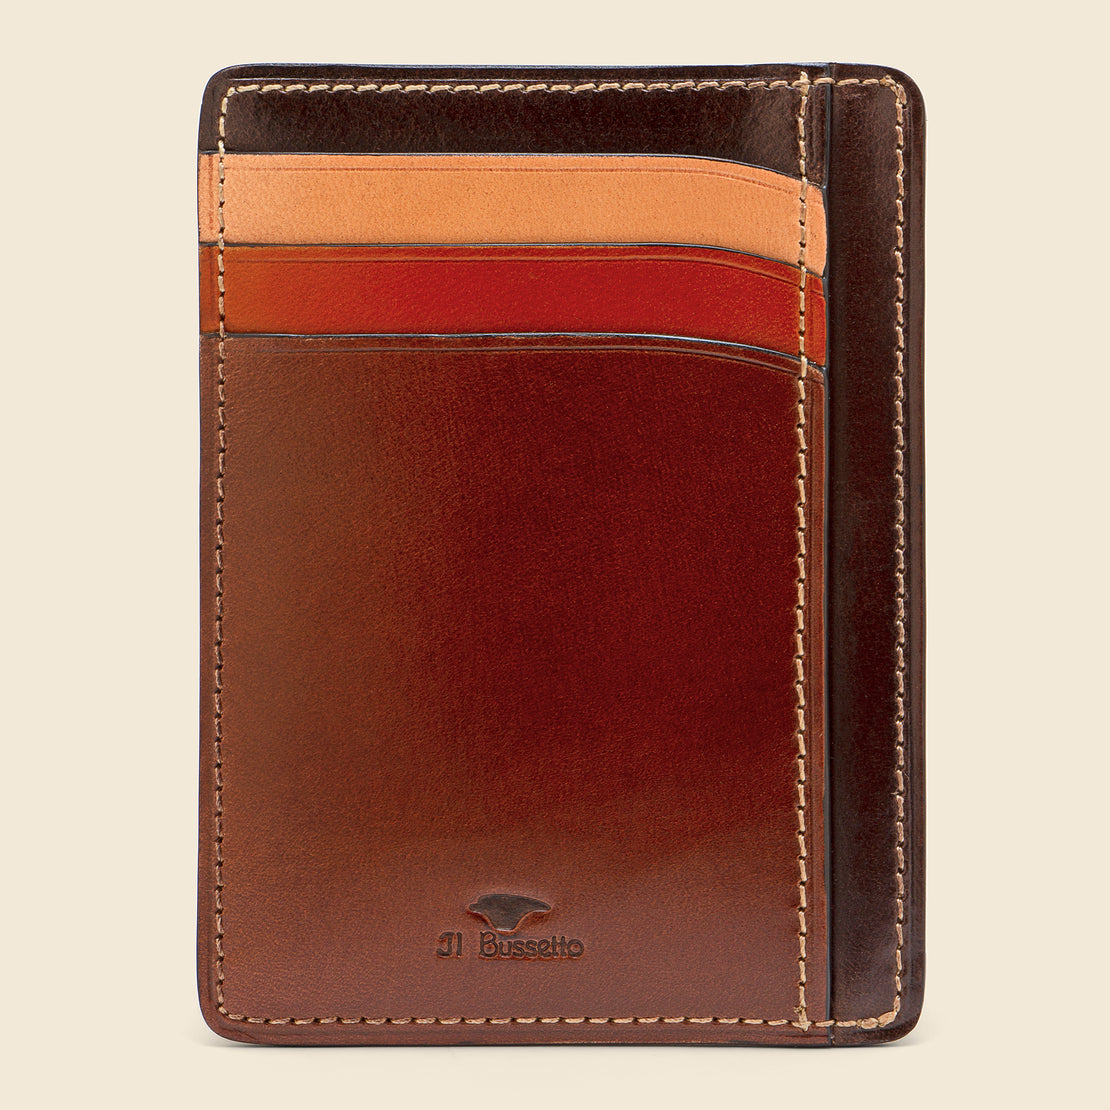 Il Bussetto Multicolor Card Wallet - Brown